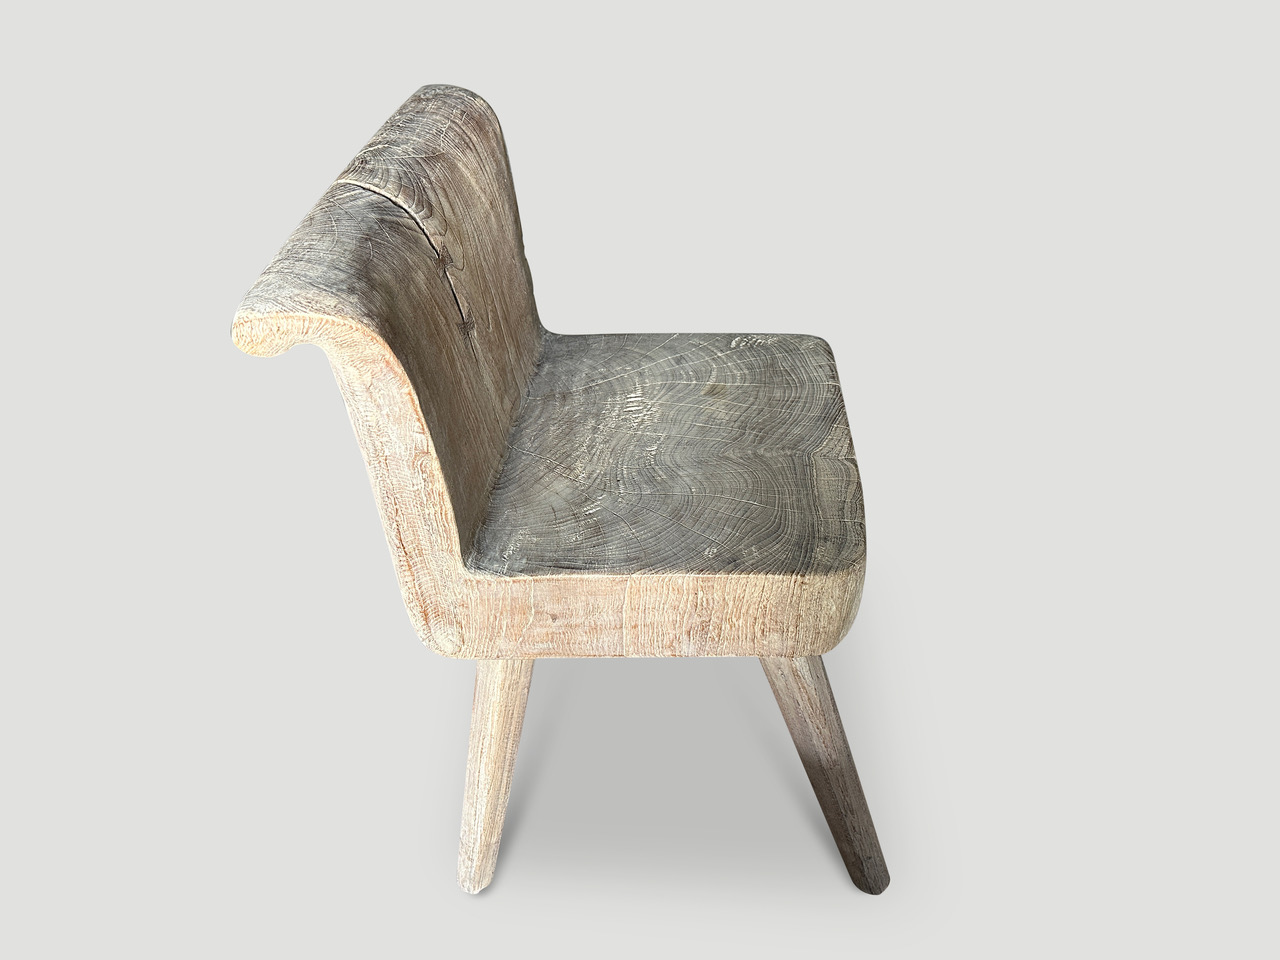 SCULPTURAL CHAIR OR SIDE TABLE